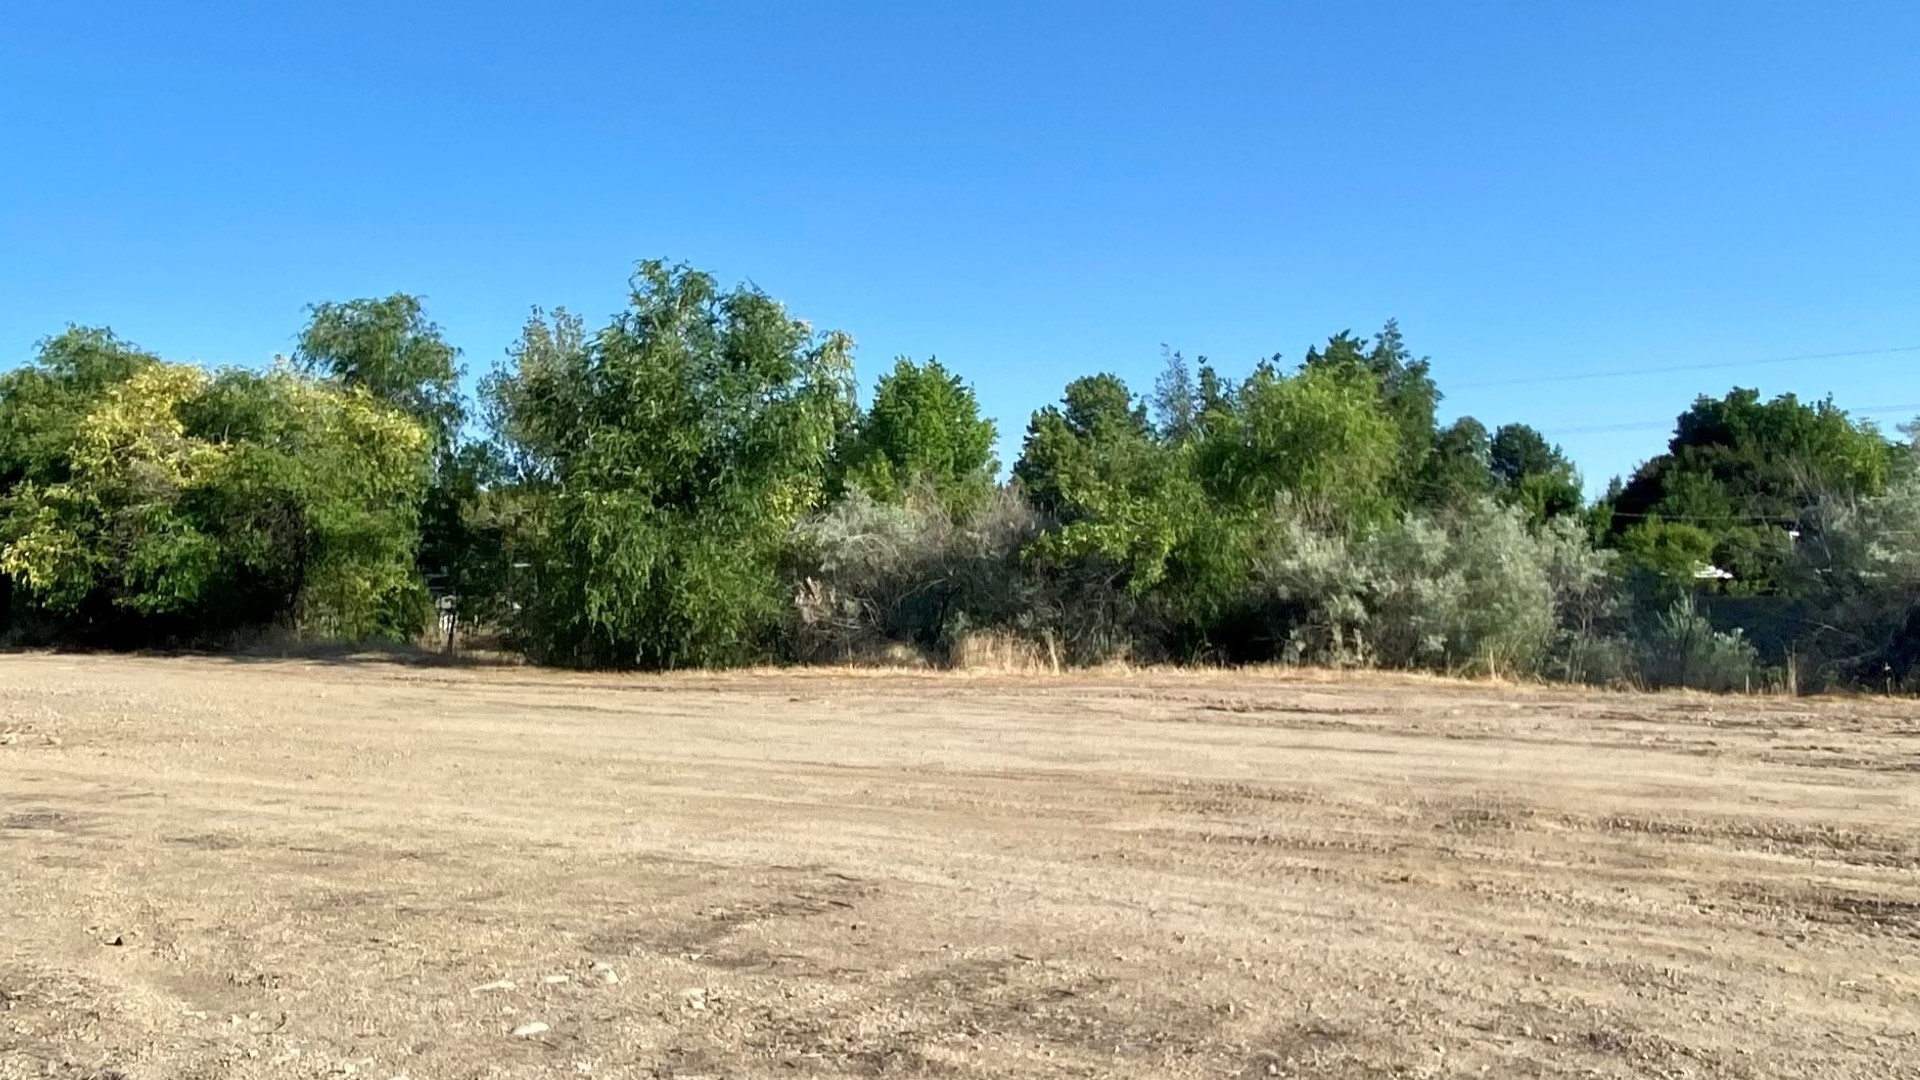 The 3-acre "linear park" along Settlers Canal would create a connection between Spaulding Ranch and Hyatt Hidden Lakes.